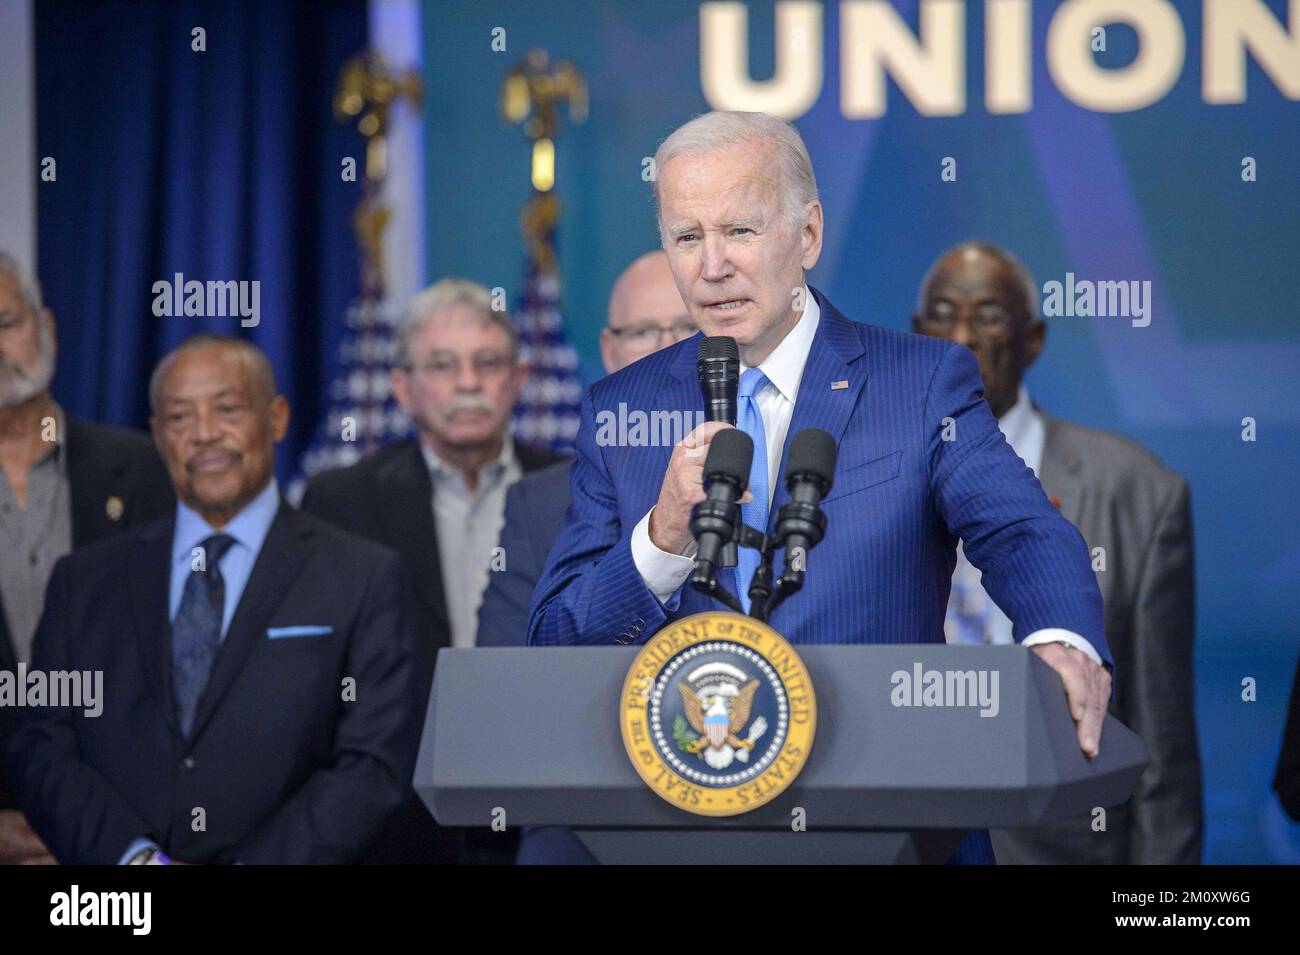 Washington, United States. 08th Dec, 2022. President Joe Biden speaks during a press conference on building a stronger economy for union workers and retirees in the South Court Auditorium at the White House in Washington, DC on Thursday, December 8, 2022. President Biden announce $36 billion for the Central States Pension Fund, preventing drastic cuts to the hard-earned pensions of over 350,000 union workers and retirees. Photo by Bonnie Cash/UPI Credit: UPI/Alamy Live News Stock Photo